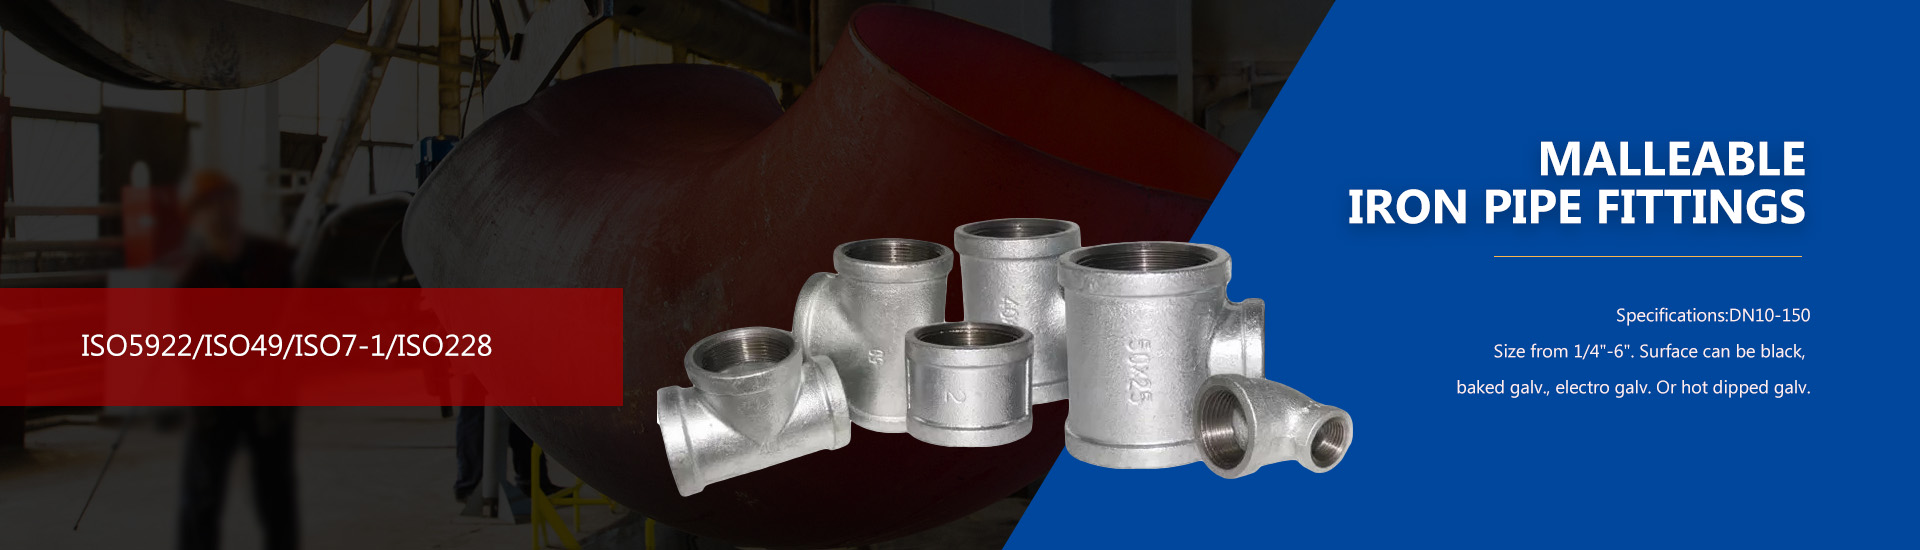 Malleable steel pipe fittings production process